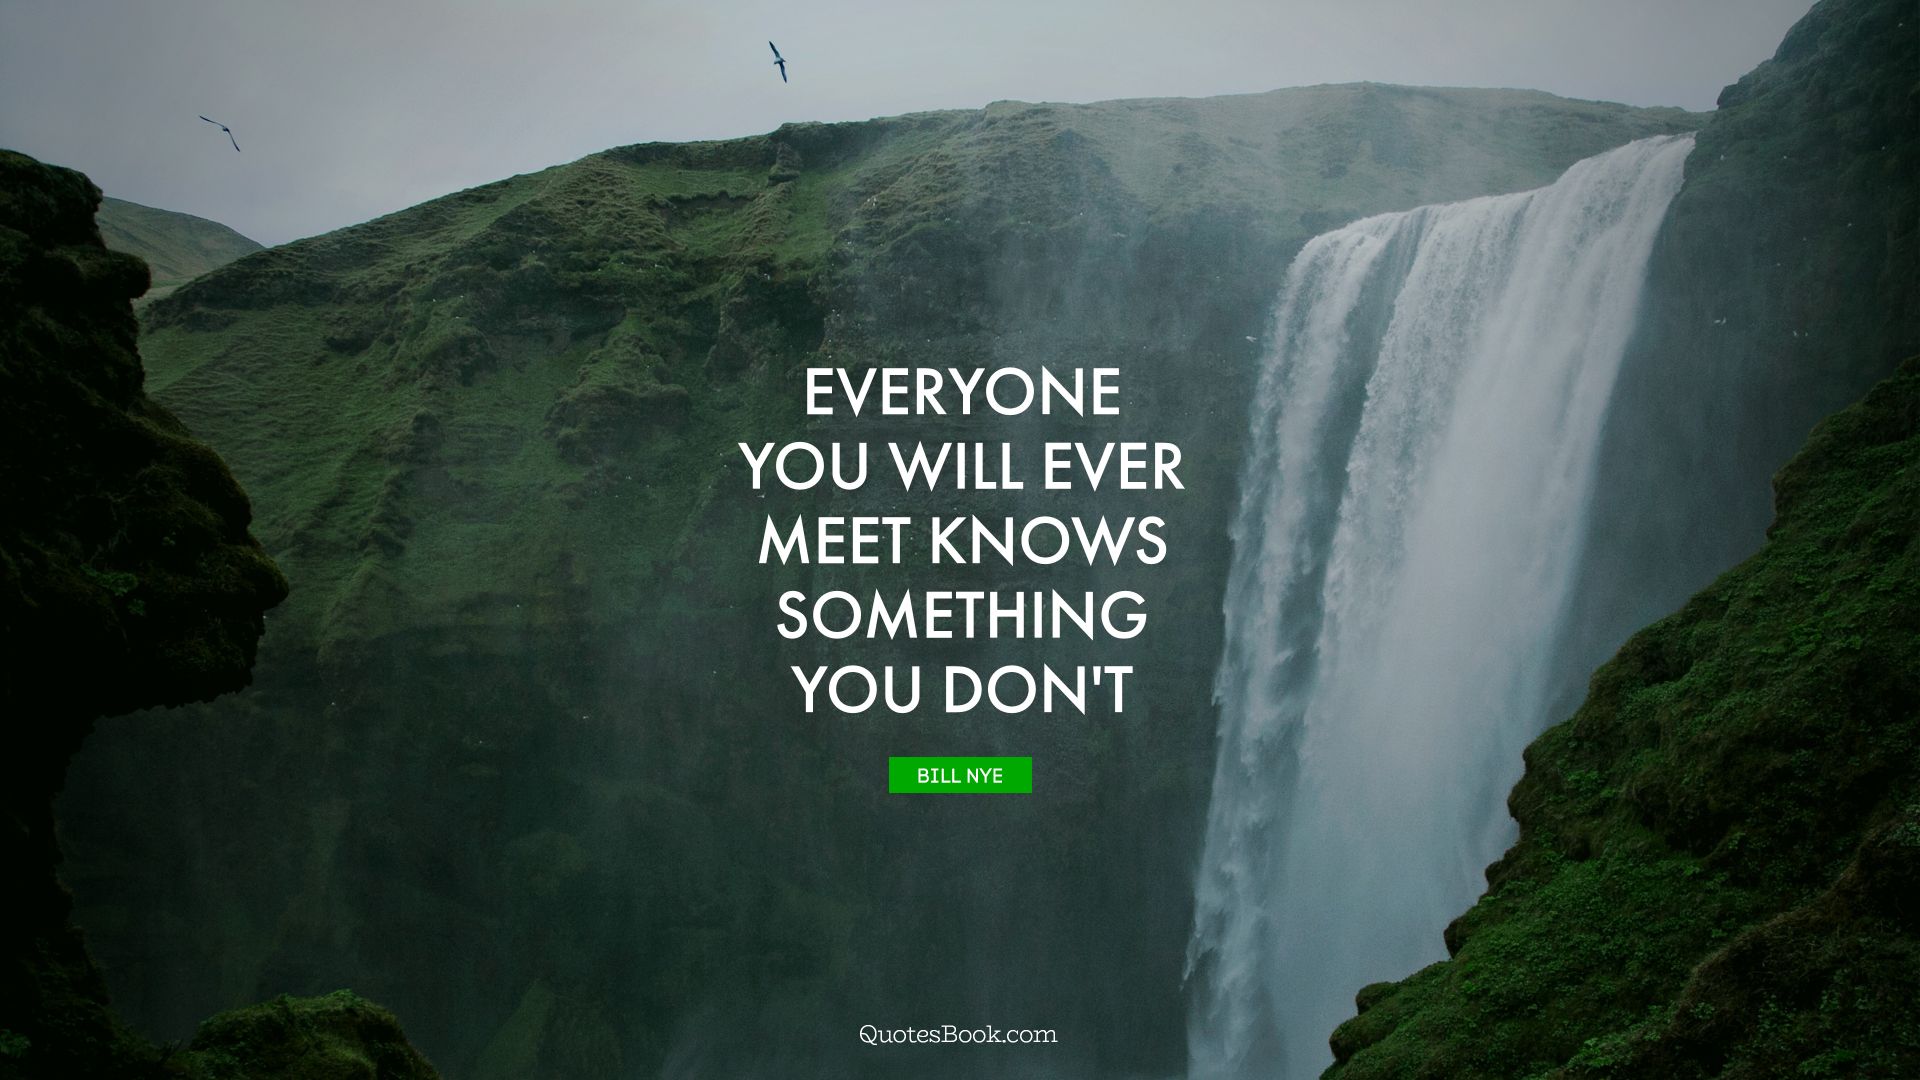 Everyone you will ever meet knows something you don't. - Quote by Bill Nye